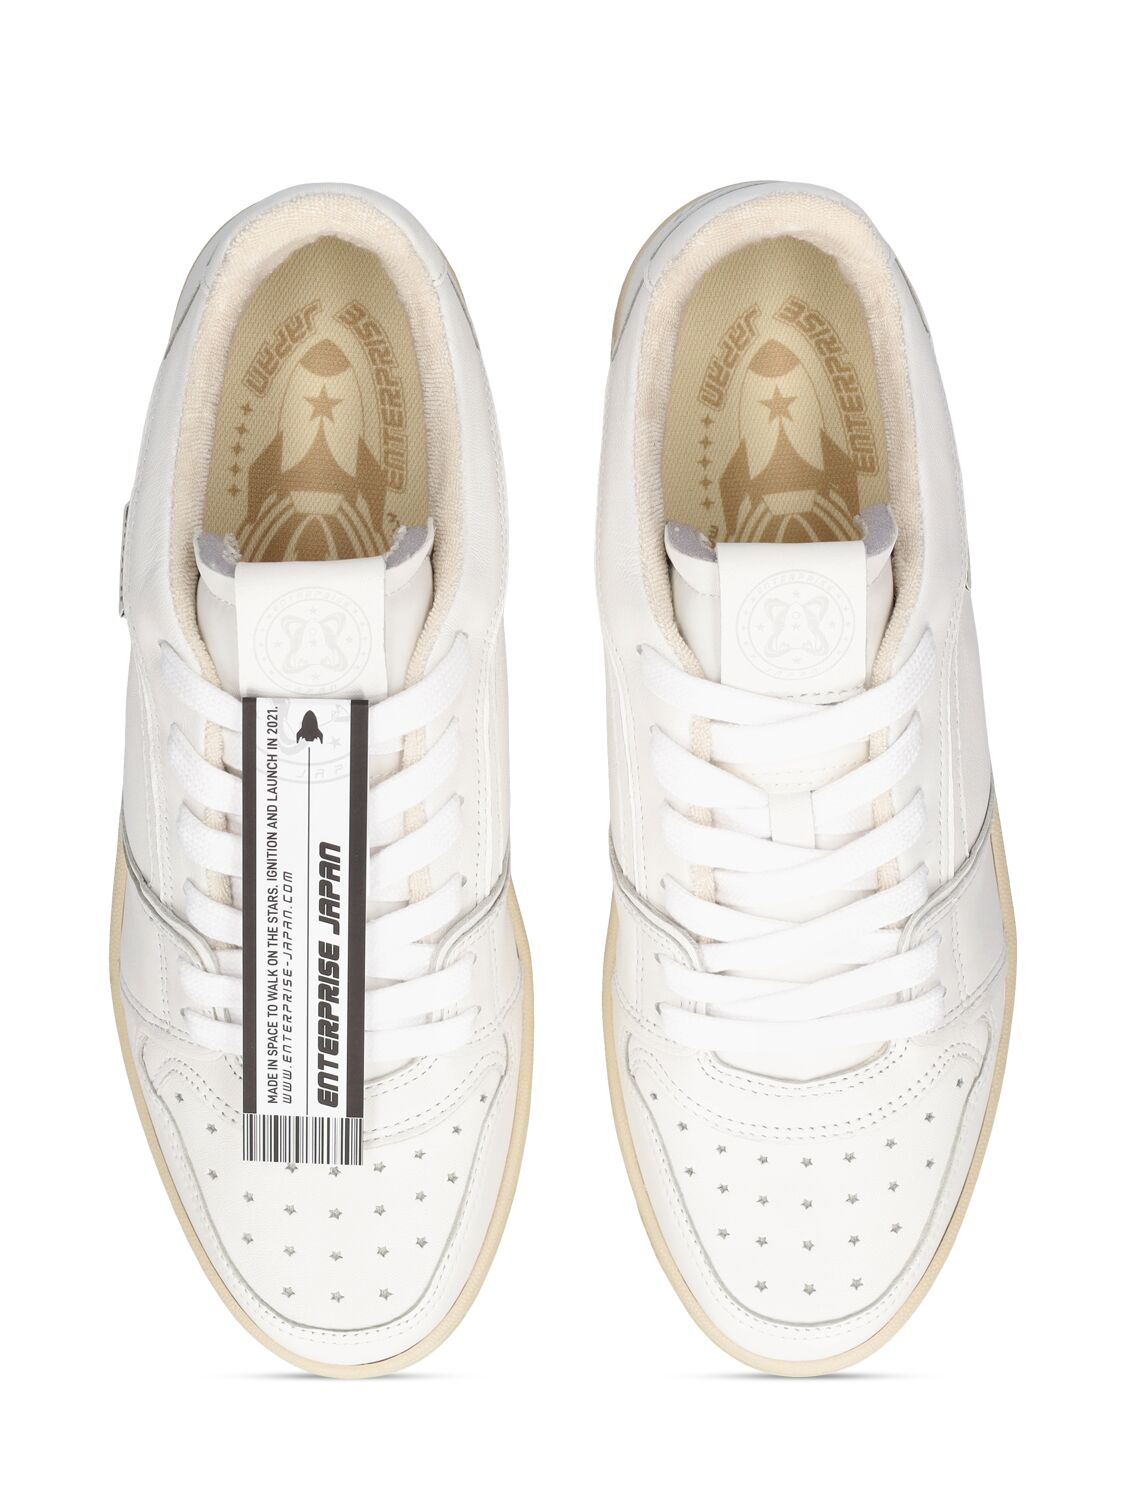 Shop Enterprise Japan Ej Egg Tag Low Leather Sneakers In White